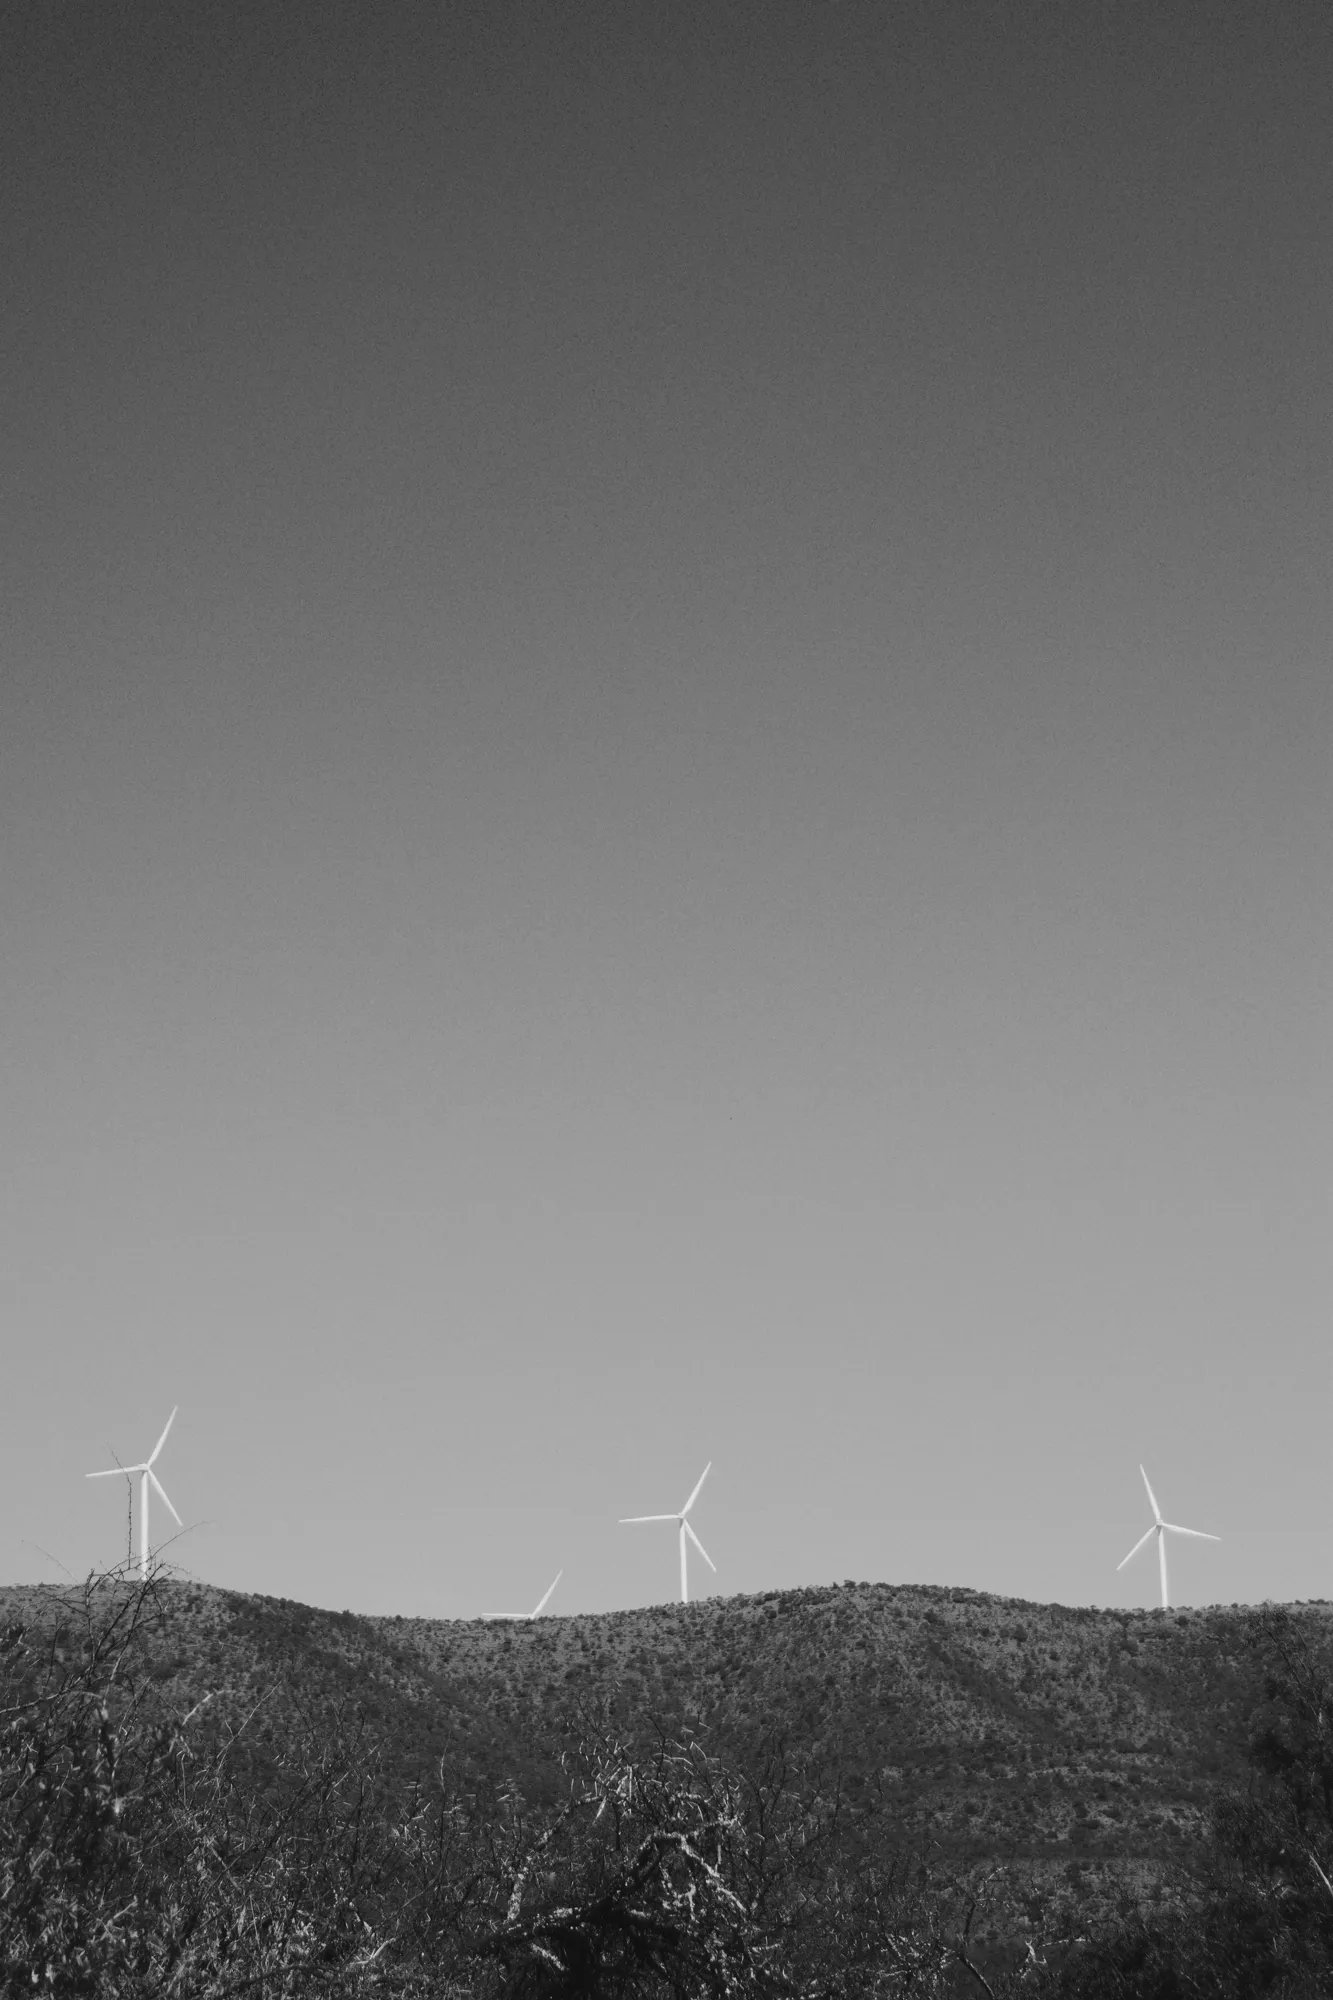 2018-22-12 - Eastern Cape - Windmills on a mountain